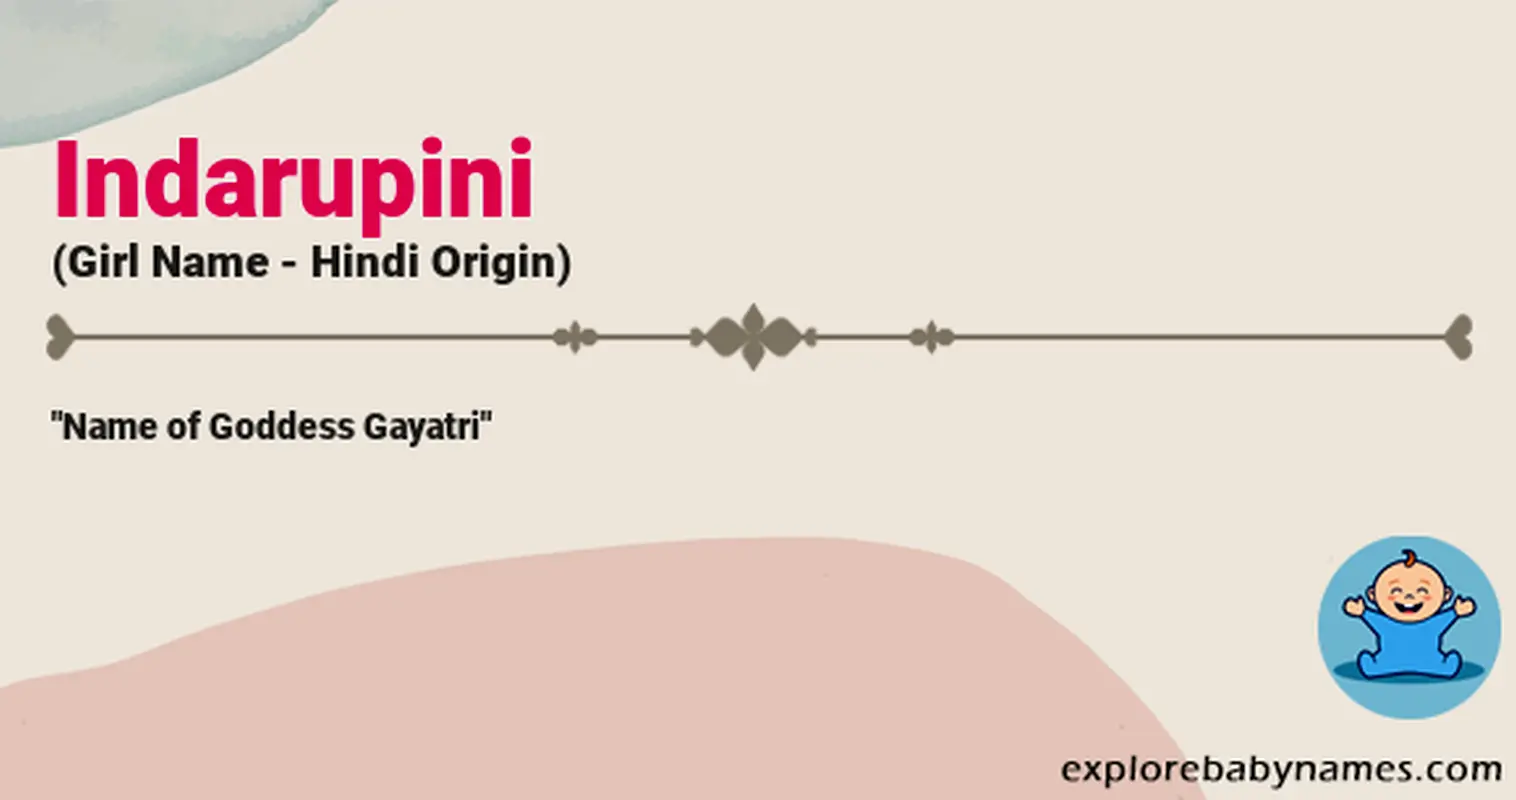 Meaning of Indarupini